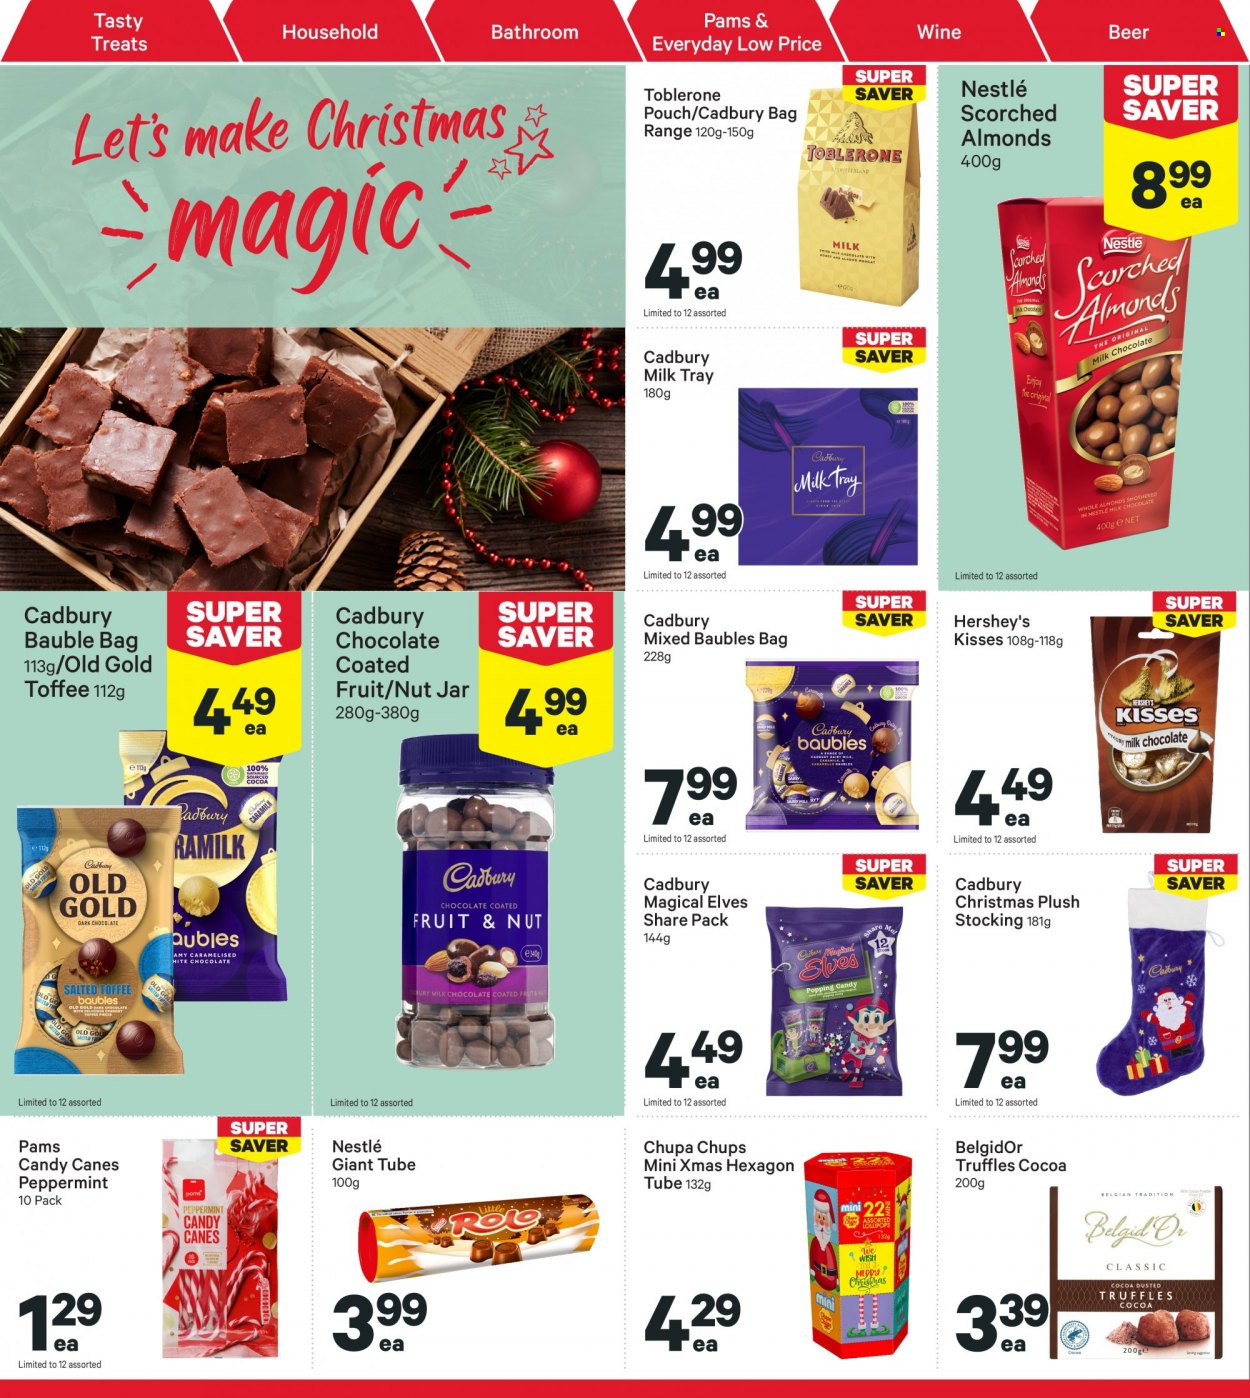 thumbnail - New World mailer - 05.12.2022 - 11.12.2022 - Sales products - Hershey's, Nestlé, chocolate, truffles, toffee, Toblerone, Milk Tray, Cadbury, Scorched Almonds, wine, beer, jar, bauble. Page 40.